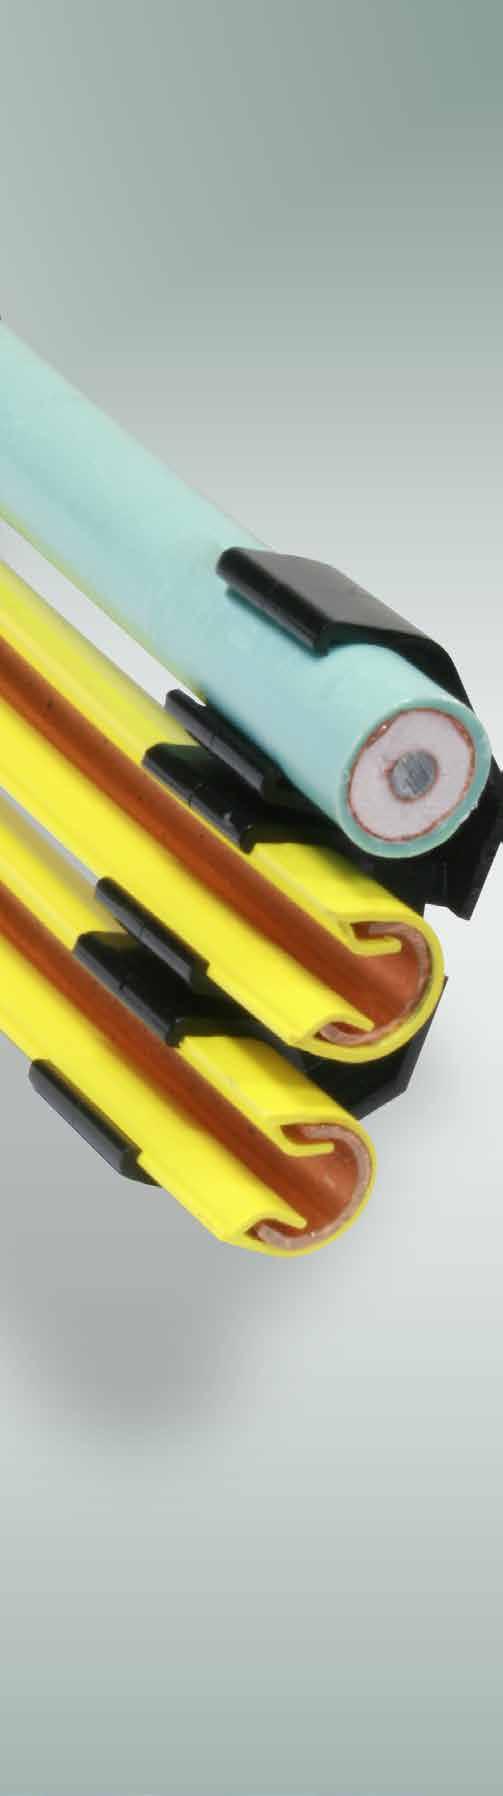 Conductix-Wampfler Conductor Rails Accessories Perfect Interplay Components designed to work together and the right accessories